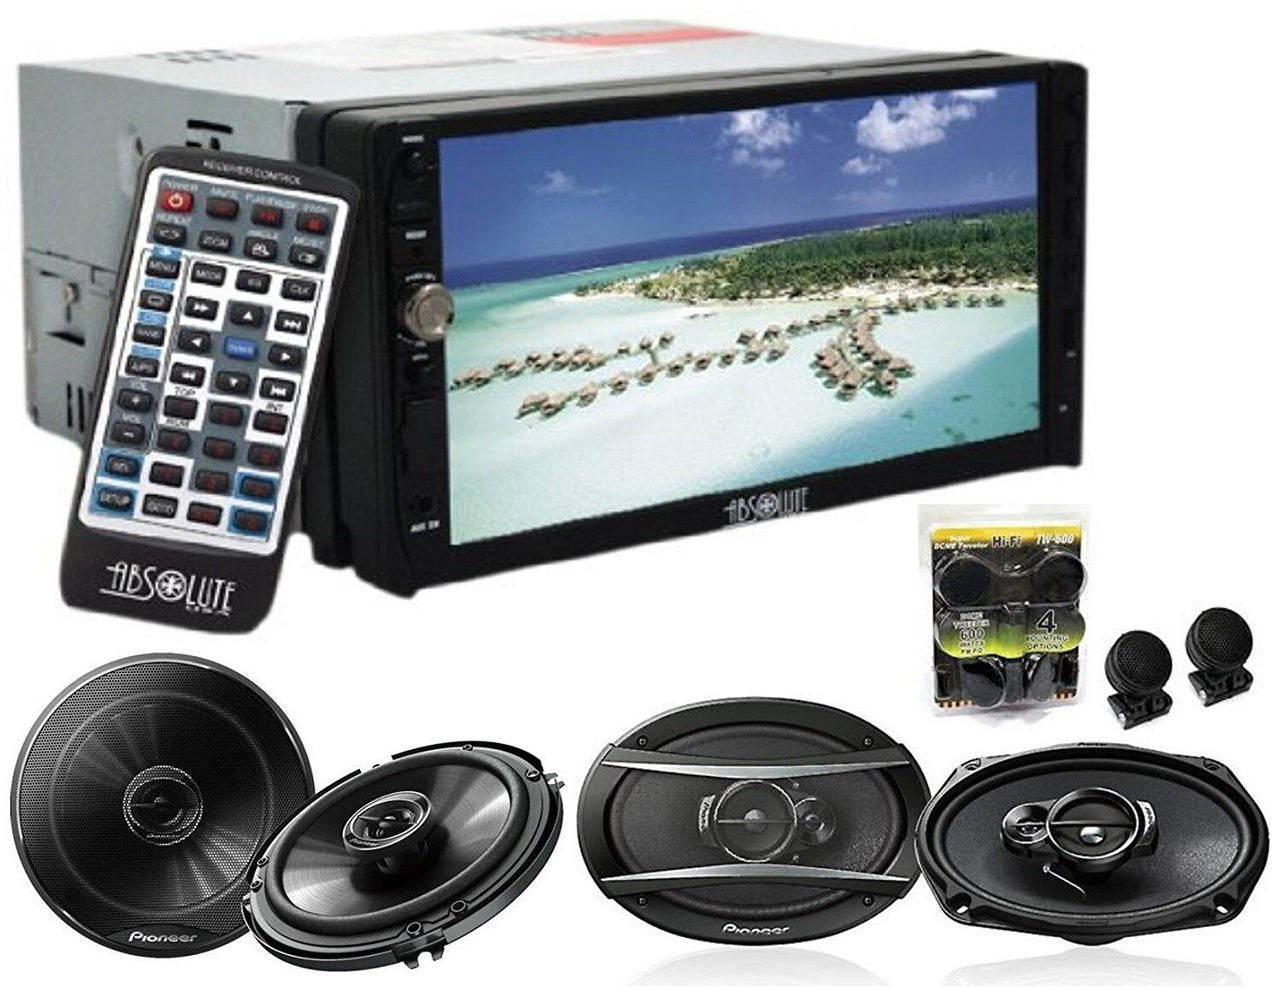 Absolute DD-3000 Double Din receiver 7" DVD CD MP3 player Double Din head unit car stereo with pioneer TS-G1620F, TS-G6930F speakers & TW600